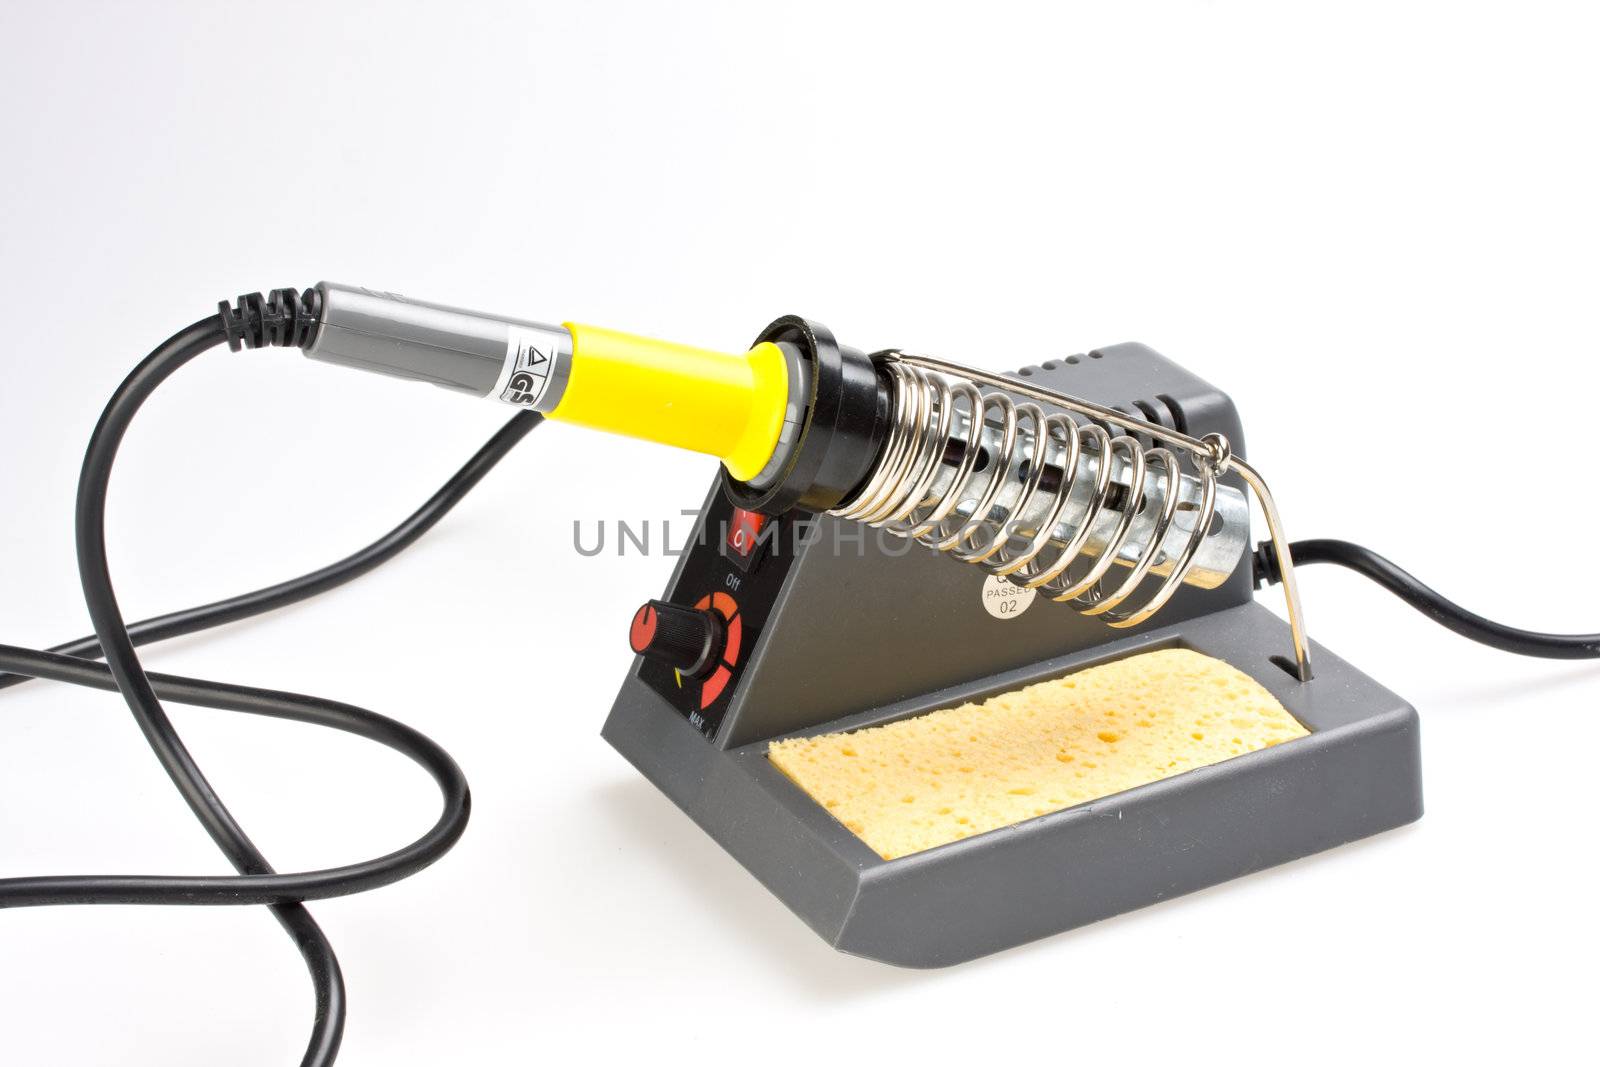 soldering station isolated on white background by bernjuer